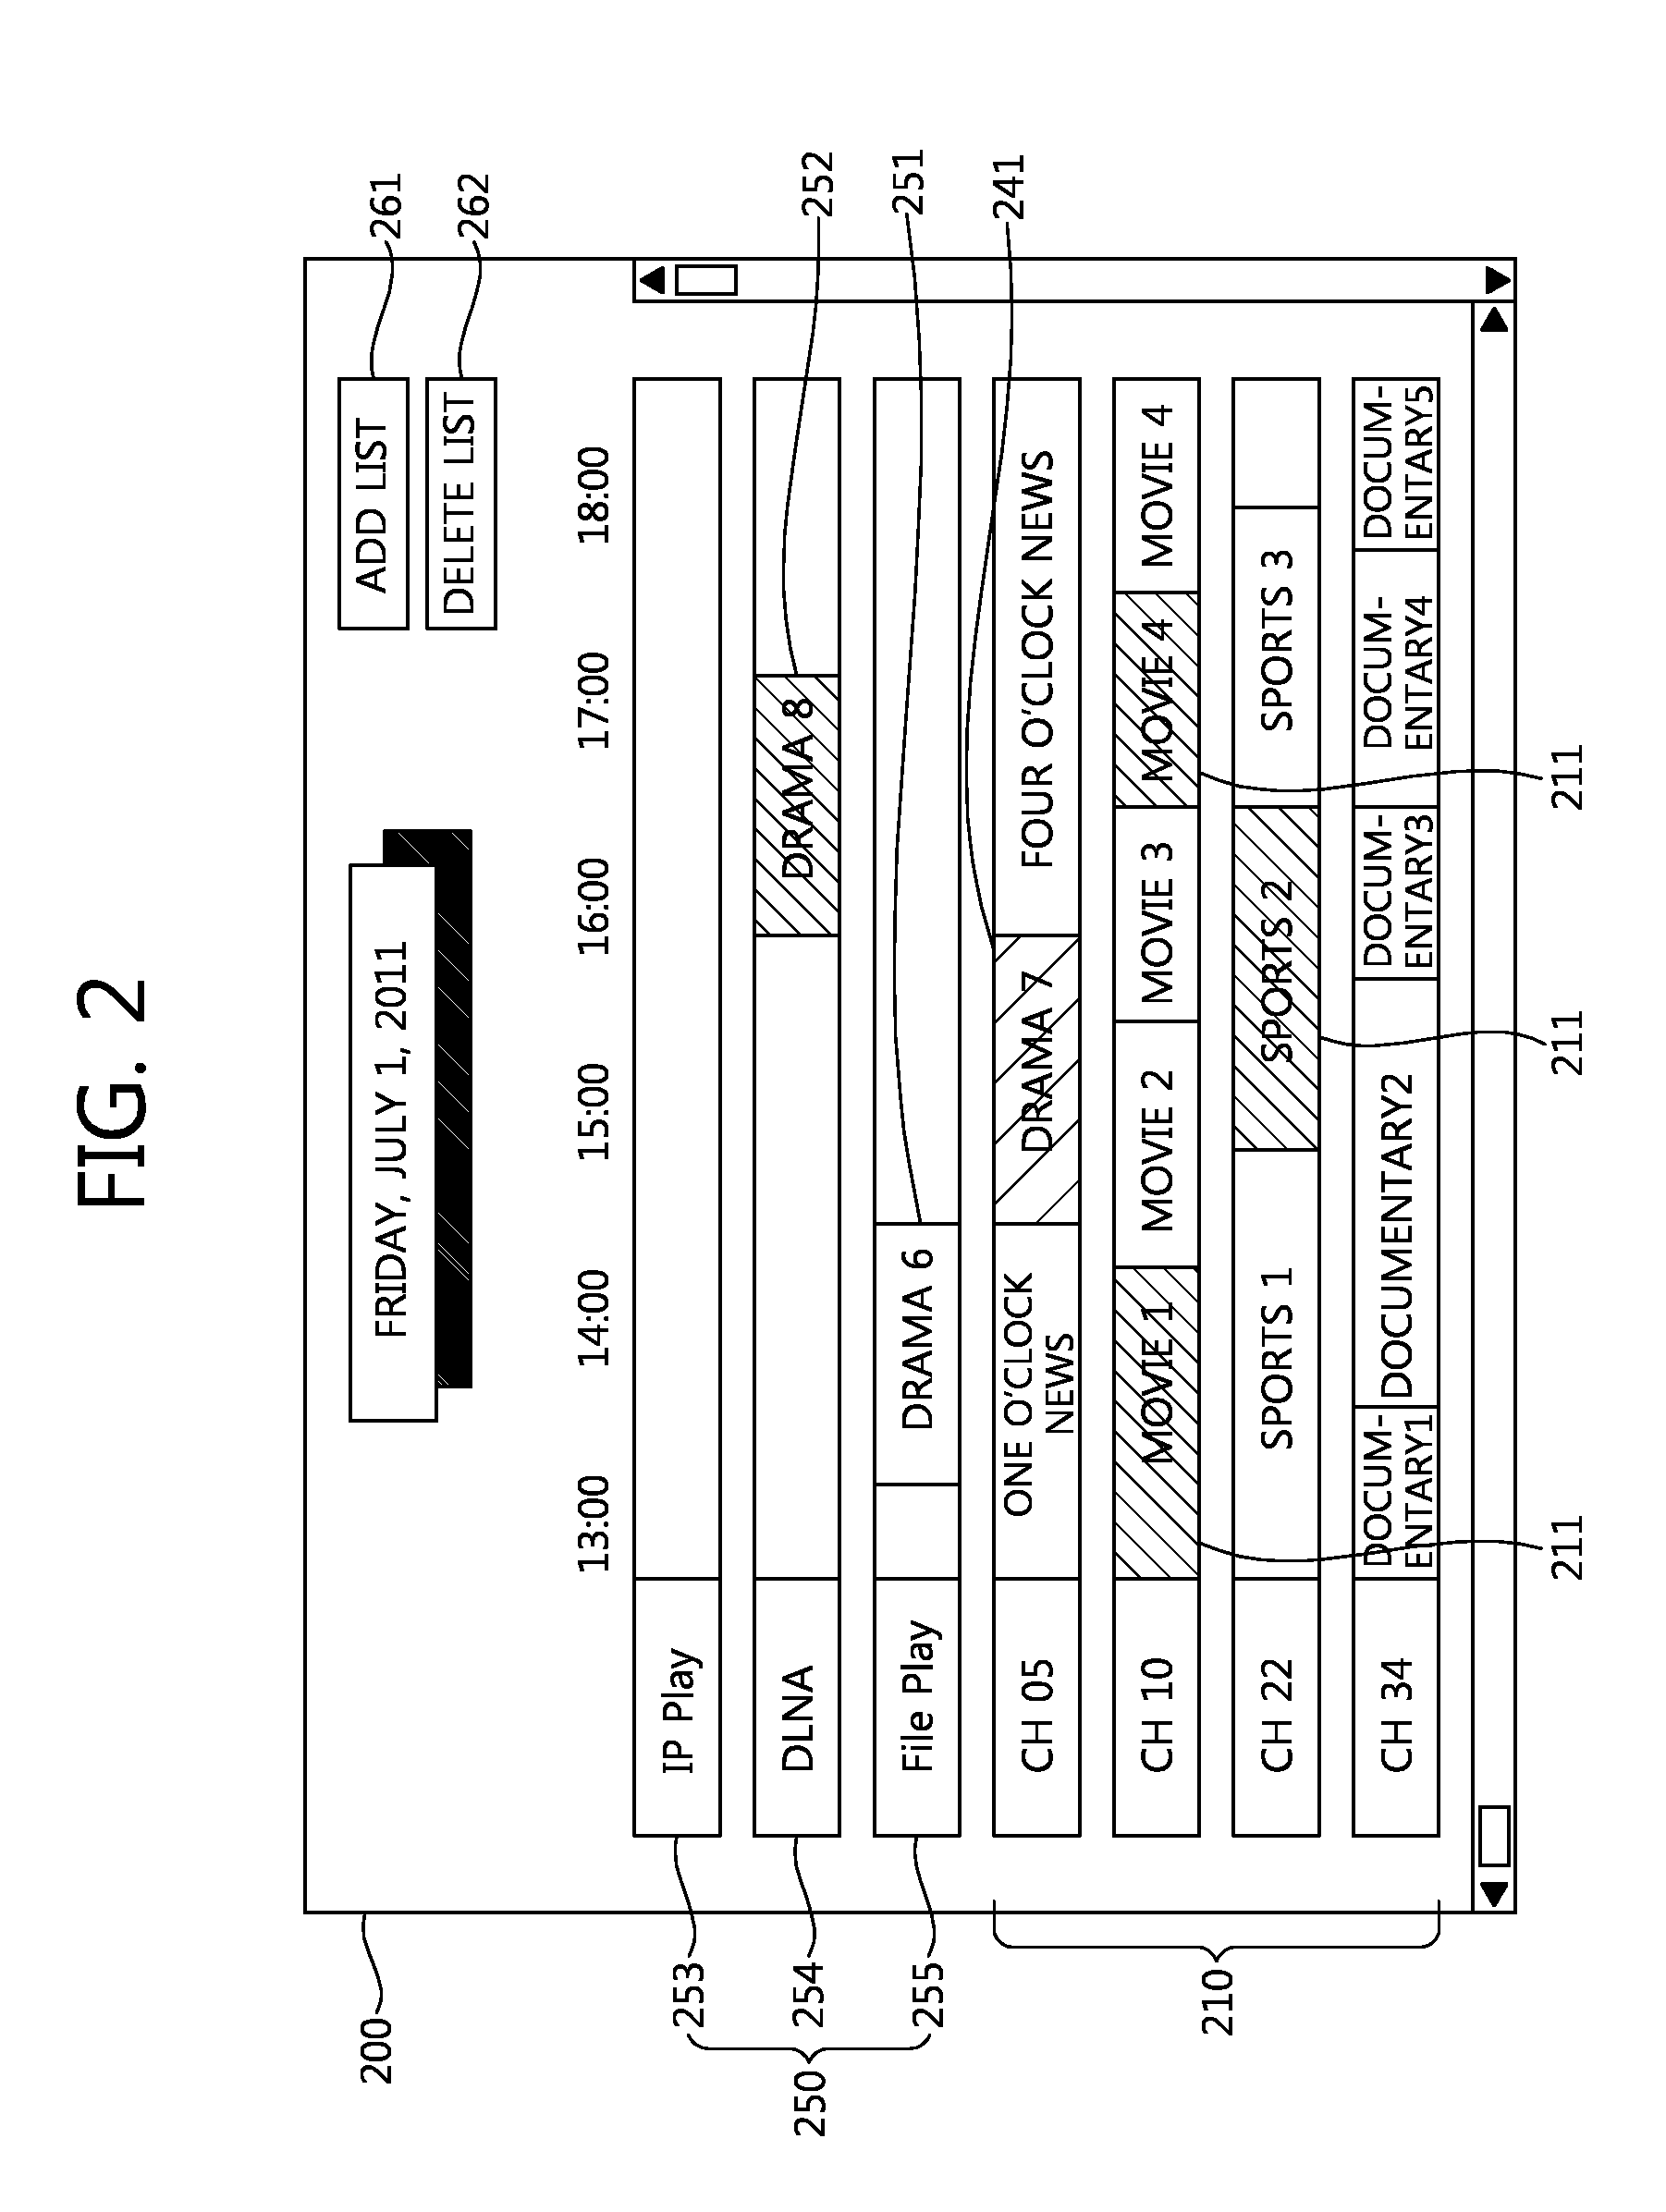 Method of providing content management list including associated media content and apparatus for performing the same